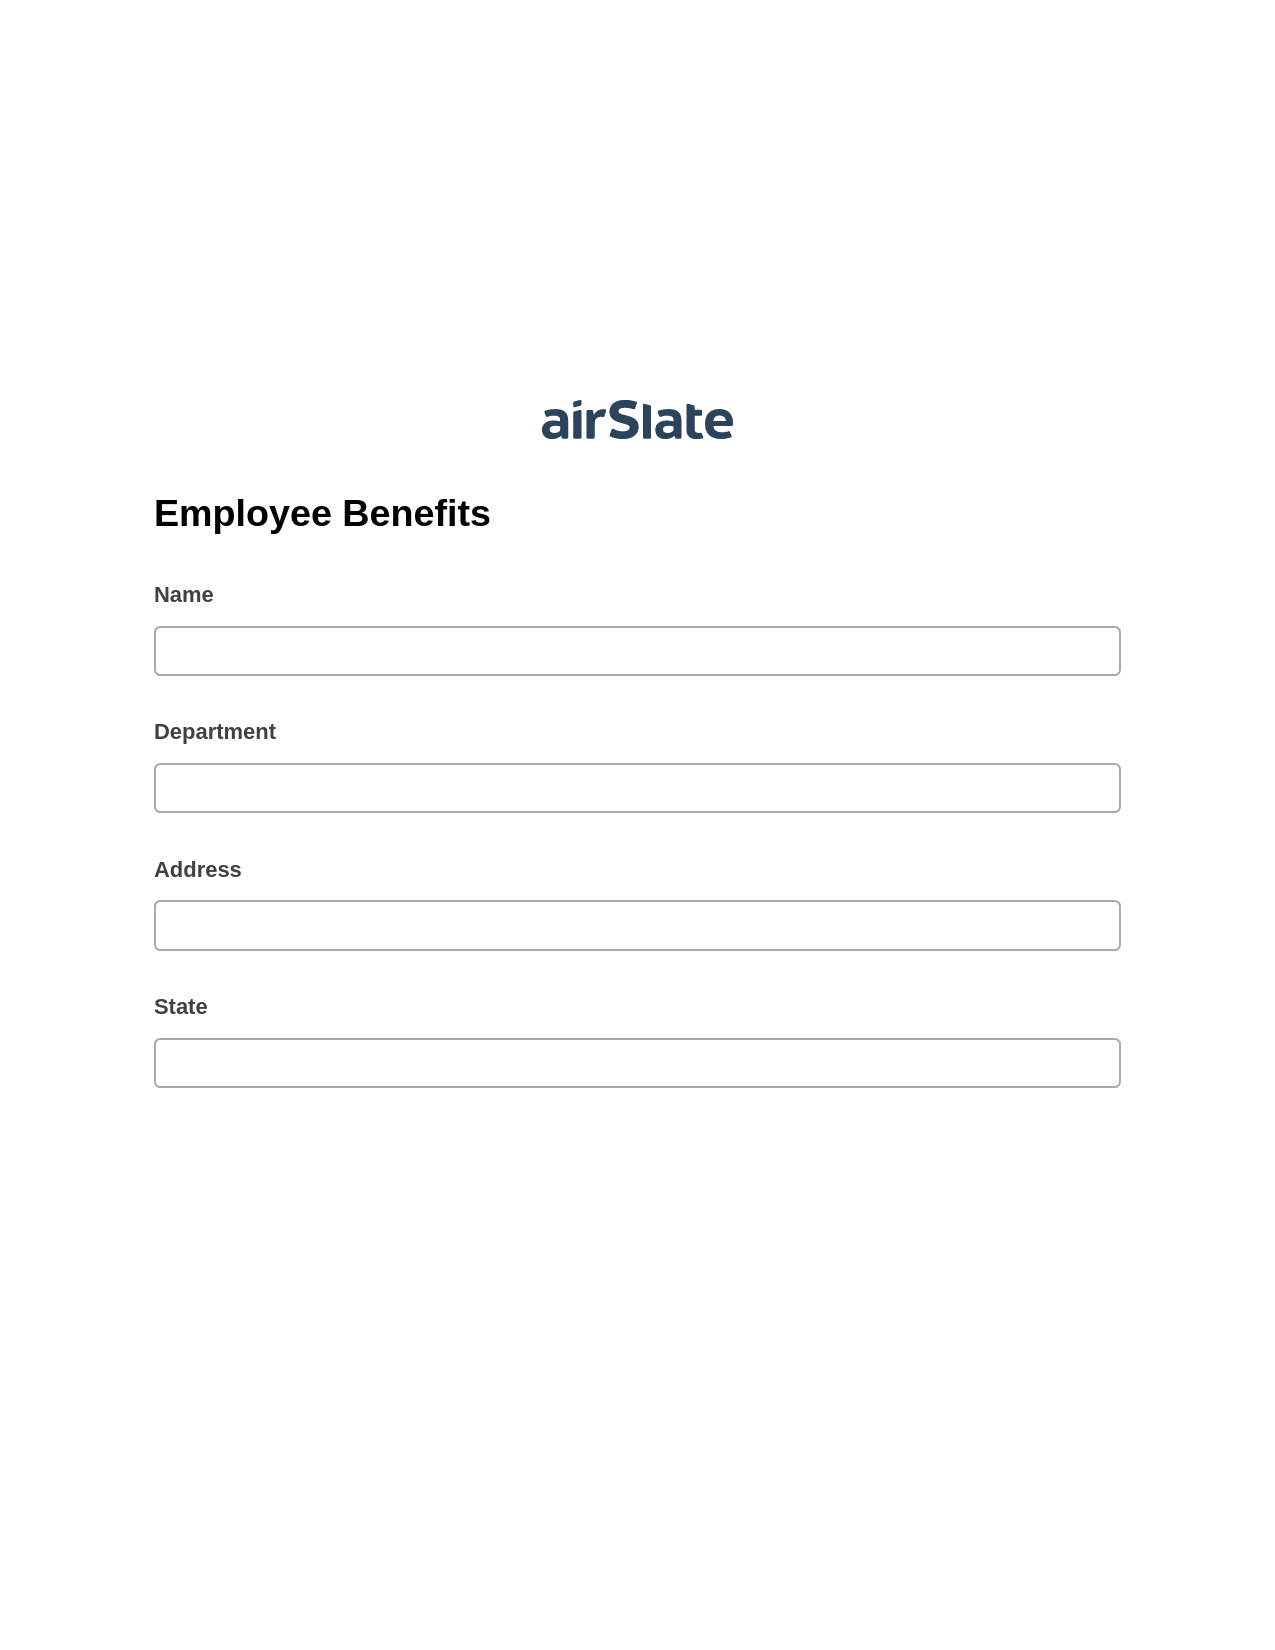 Employee Benefits Pre-fill Document Bot, Unassign Role Bot, Post-finish Document Bot